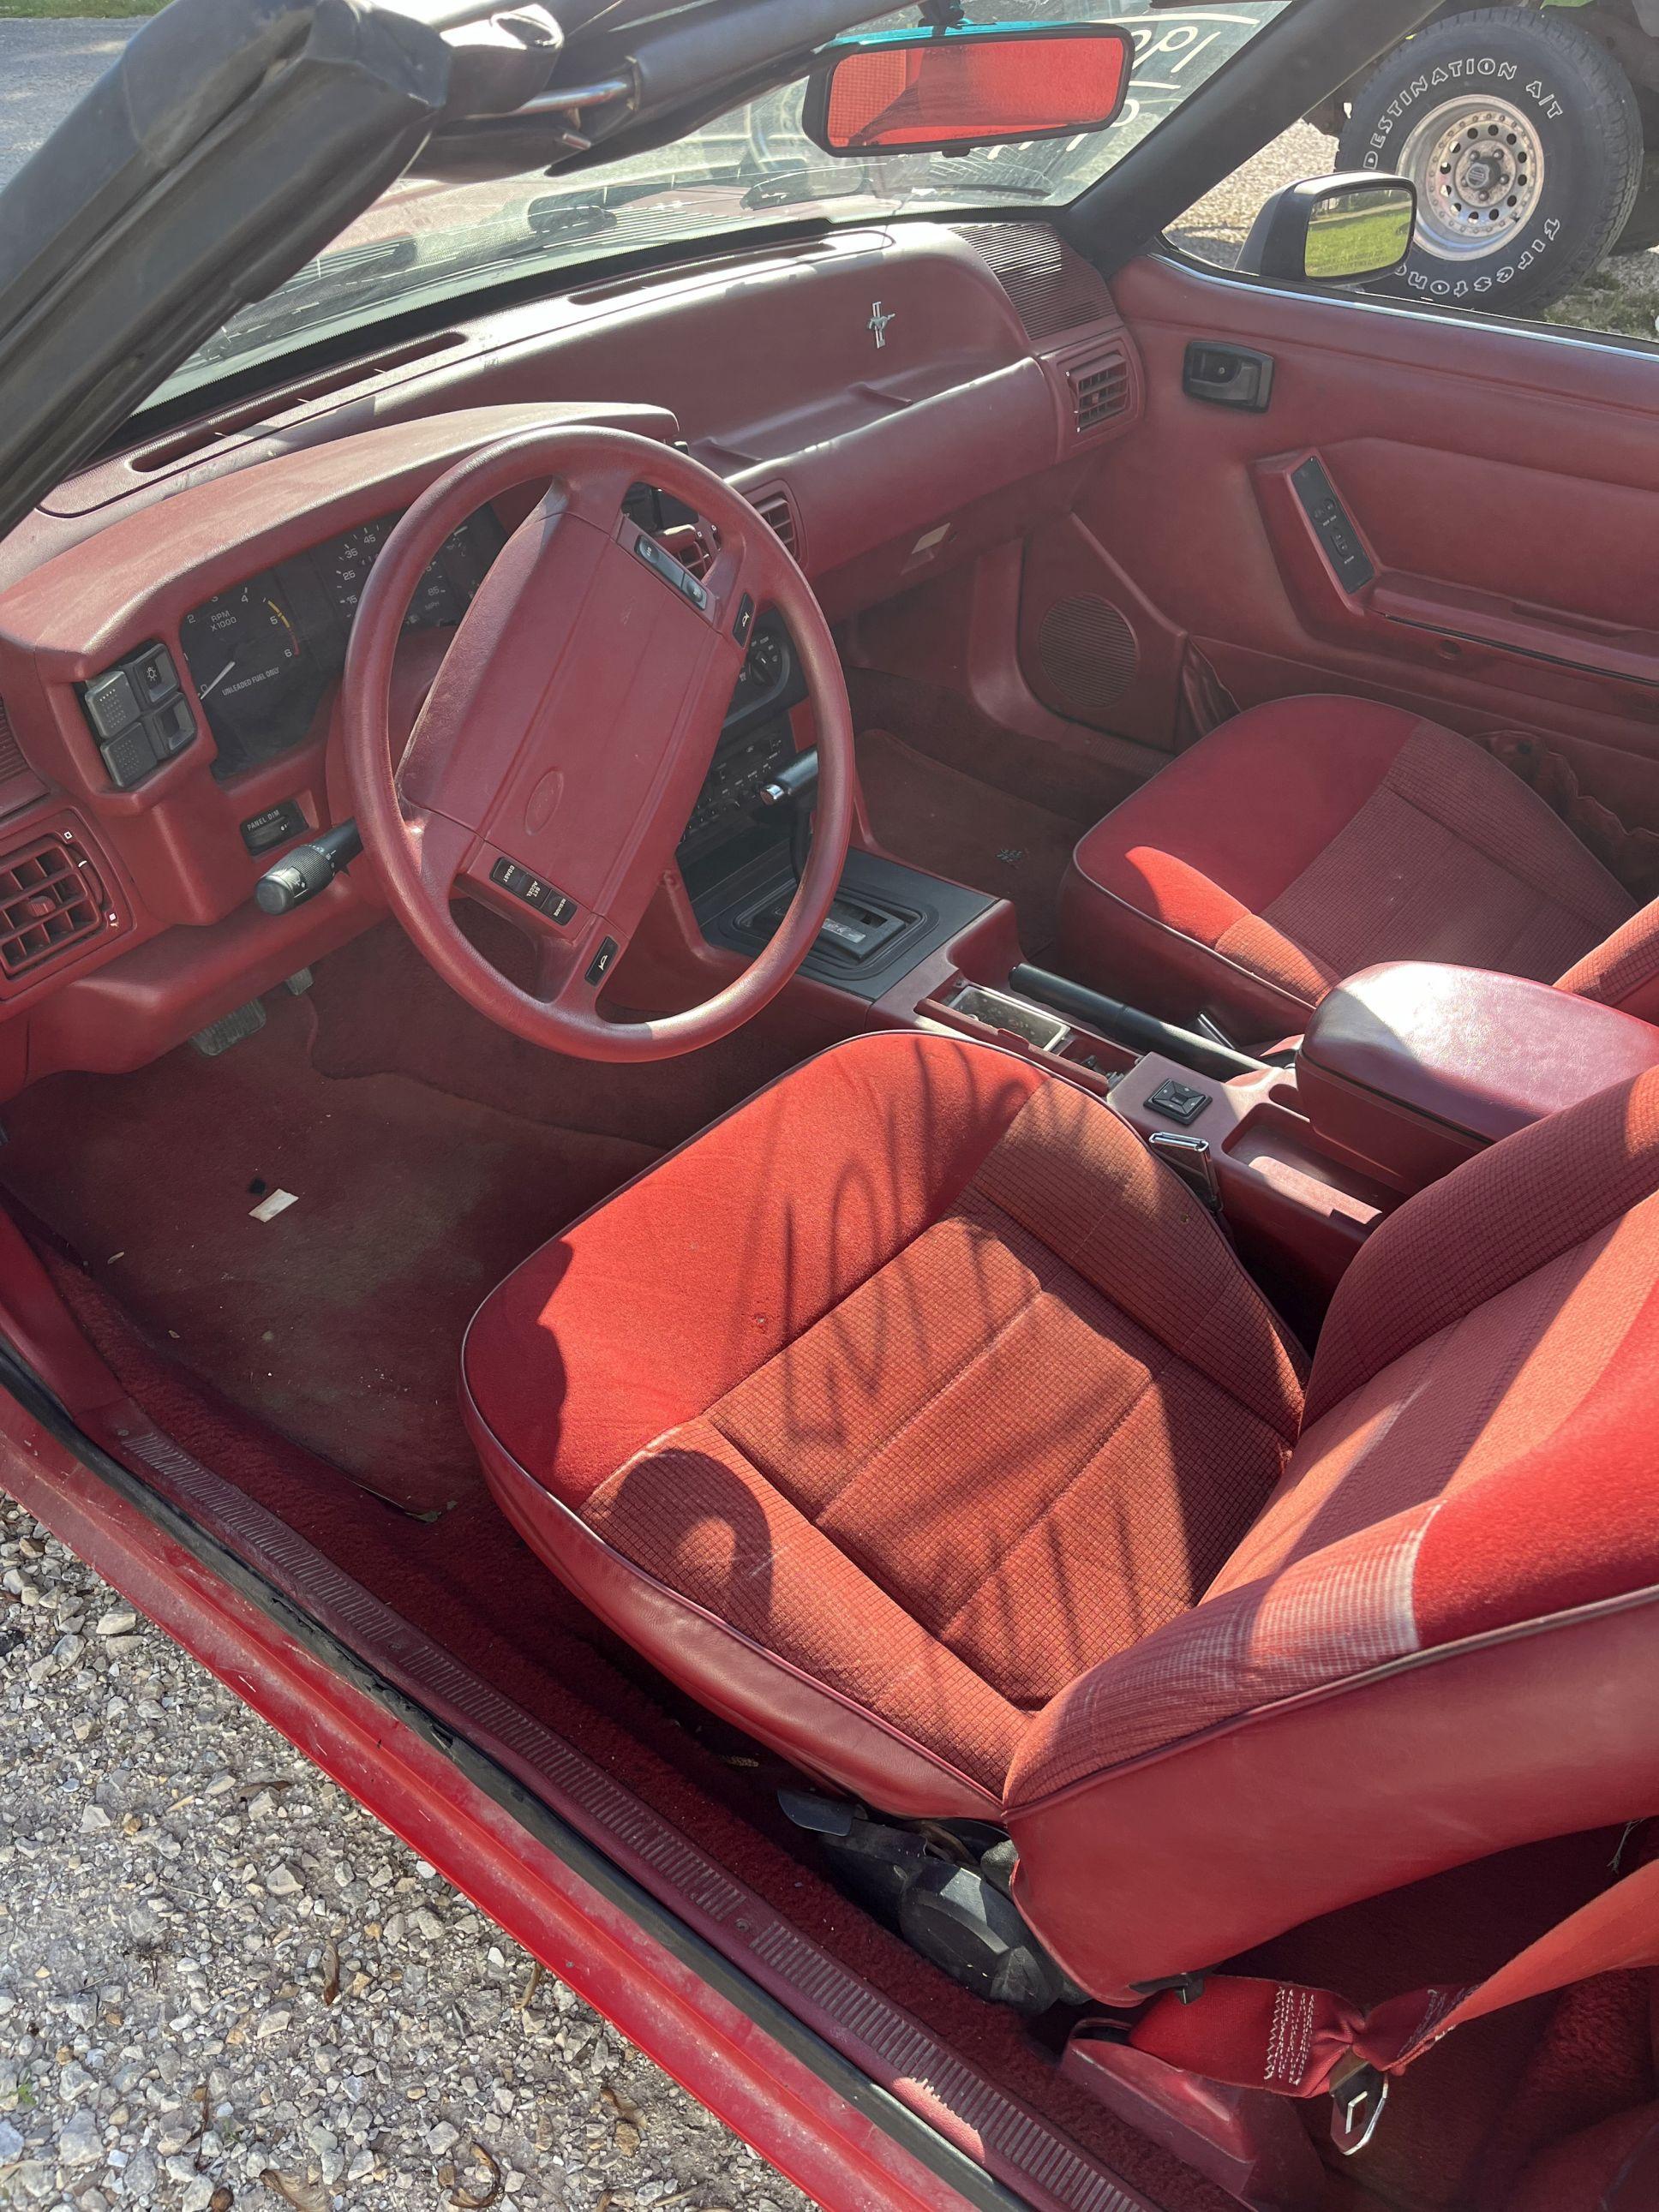 1992 Ford Mustang LX Convertible